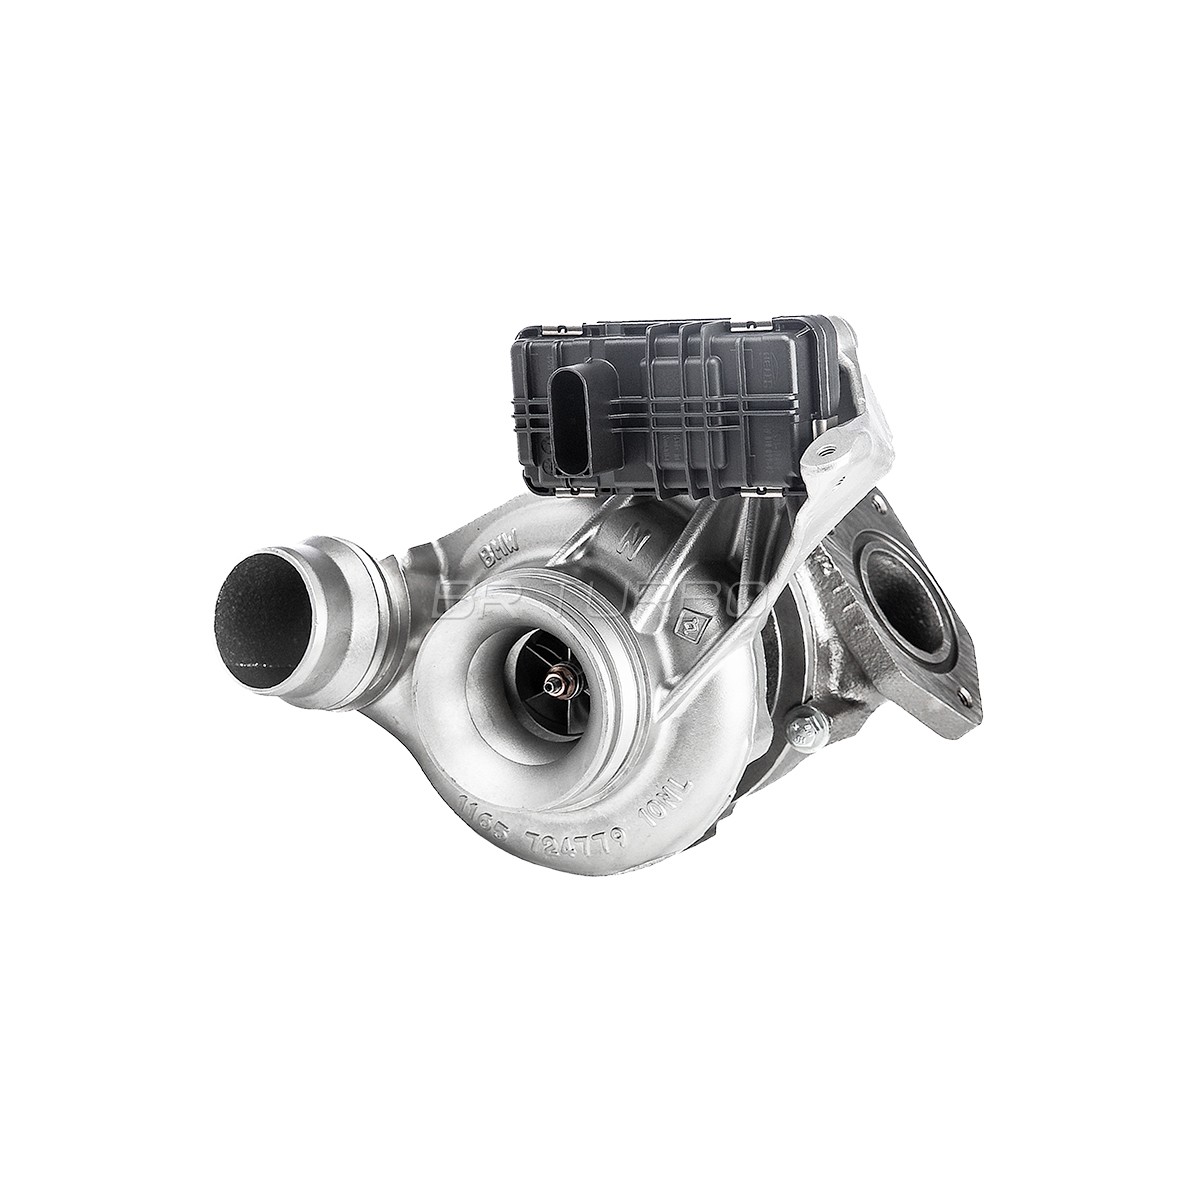 4933500585RS Turbocharger REMANUFACTURED TURBOCHARGER BR Turbo 4933500585RS review and test